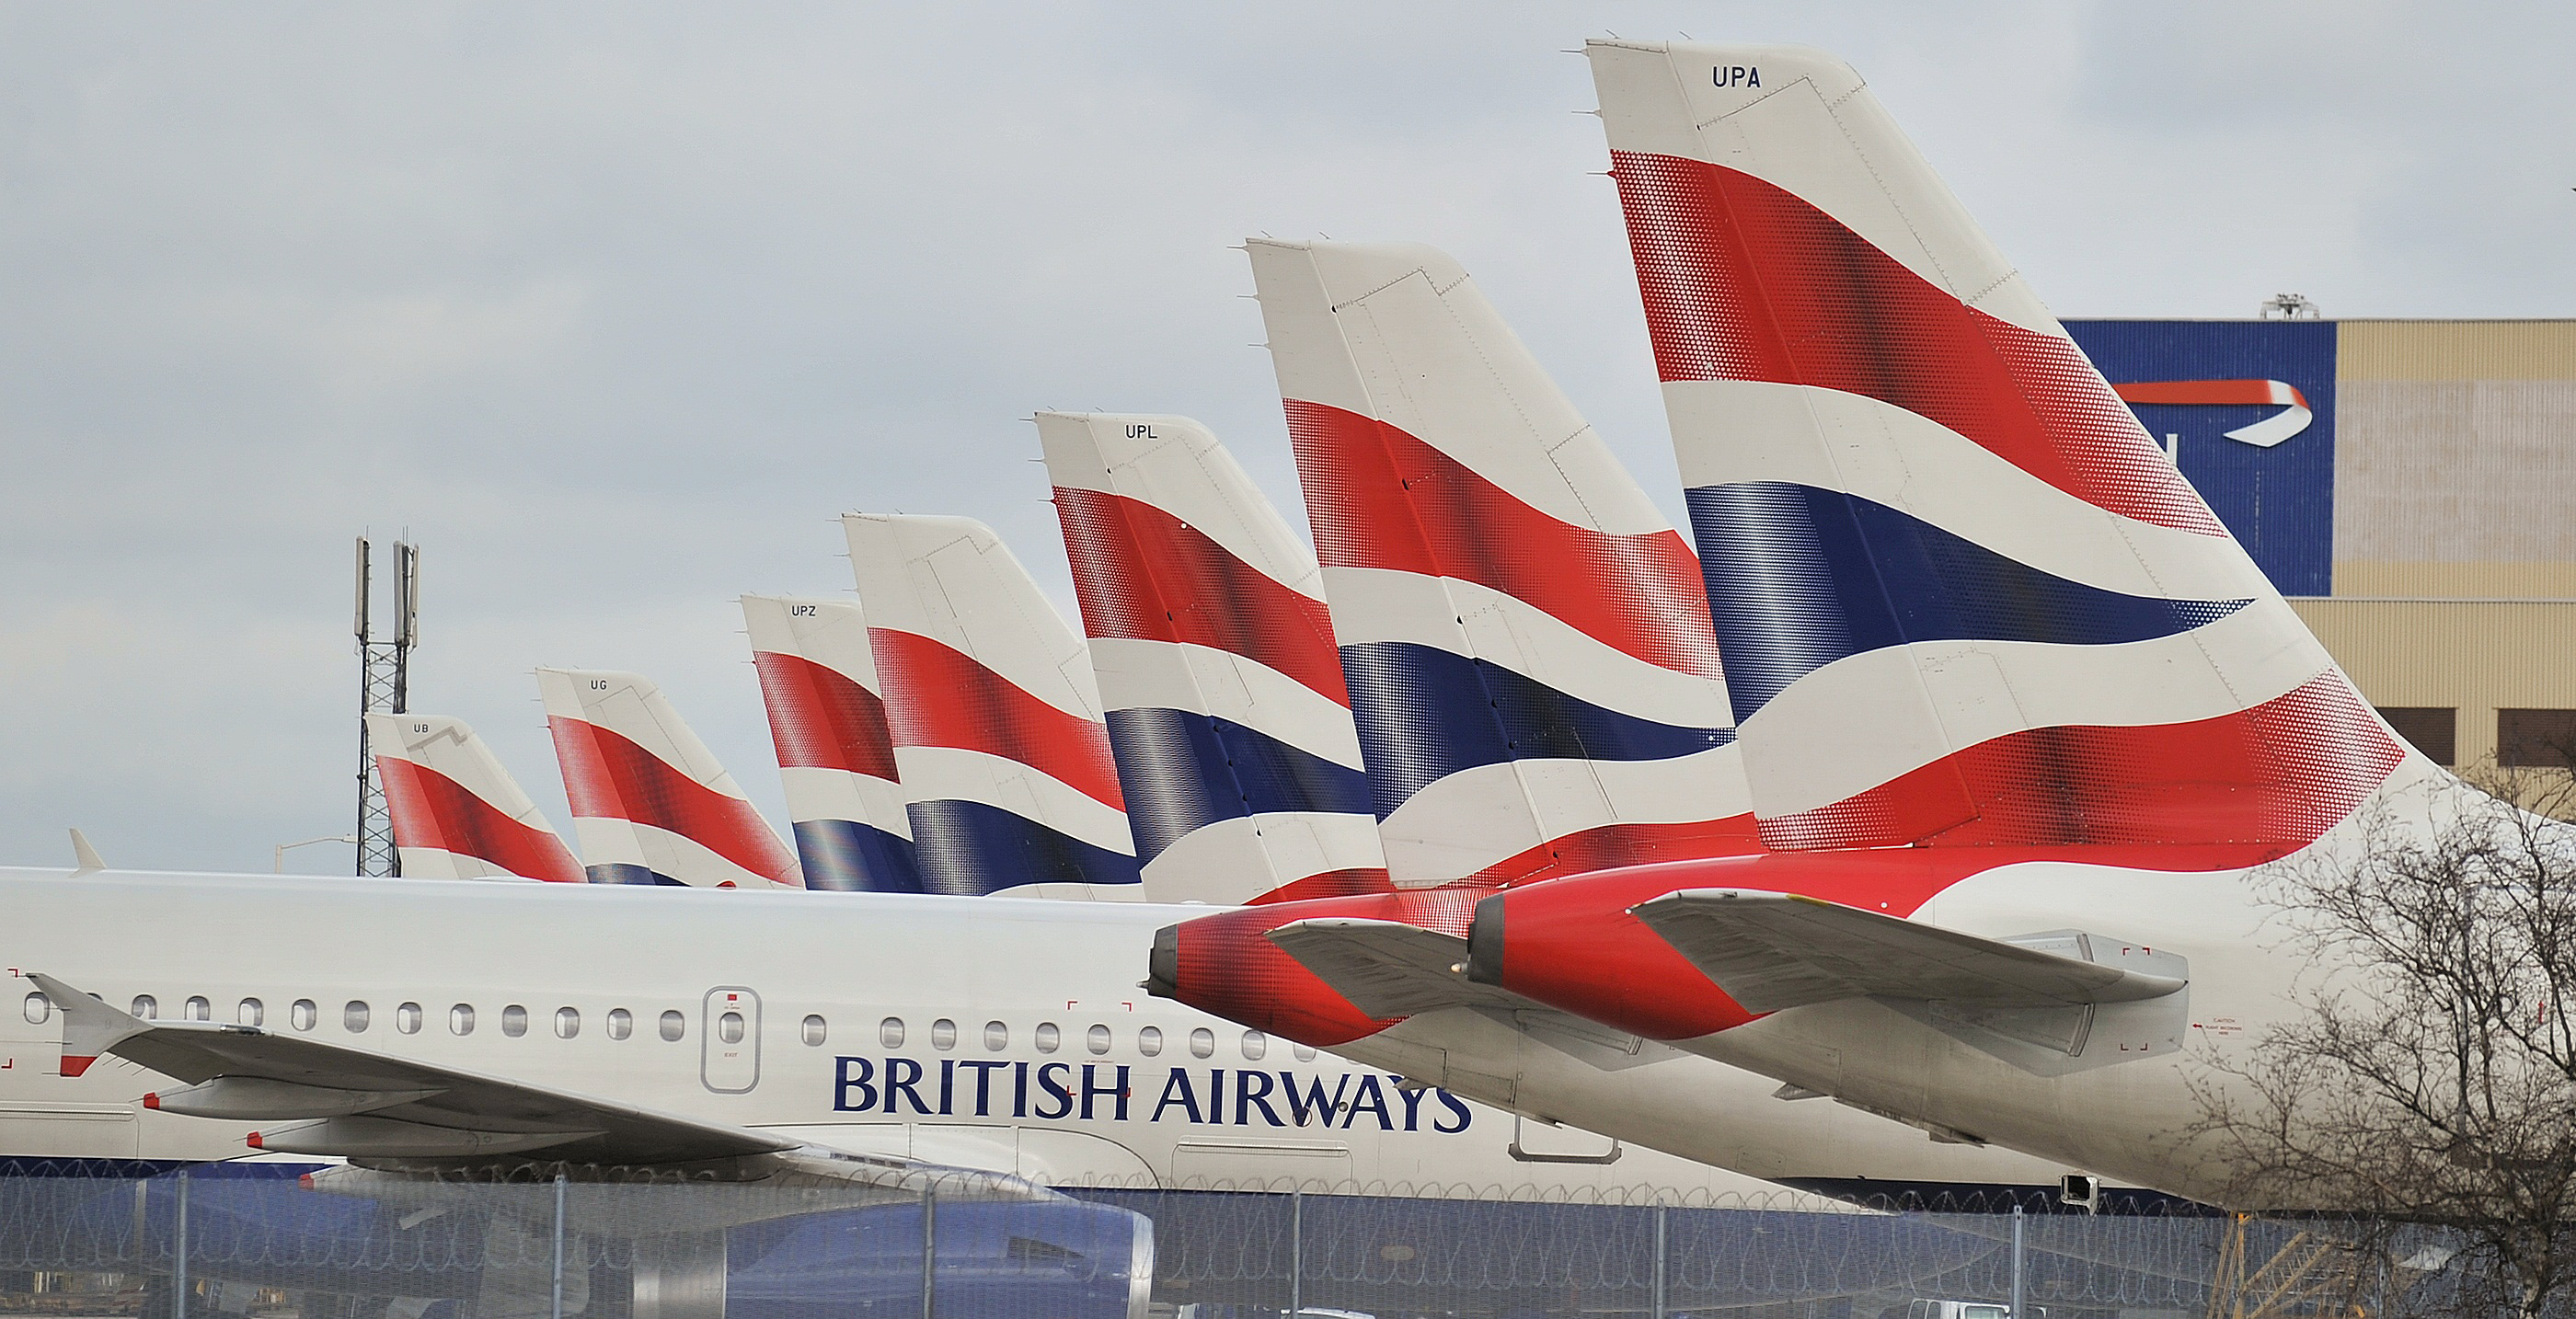 British Airways planes are grounded at Heathrow Airport on March 28, 2010. (Leon Neal—AFP/Getty Images)